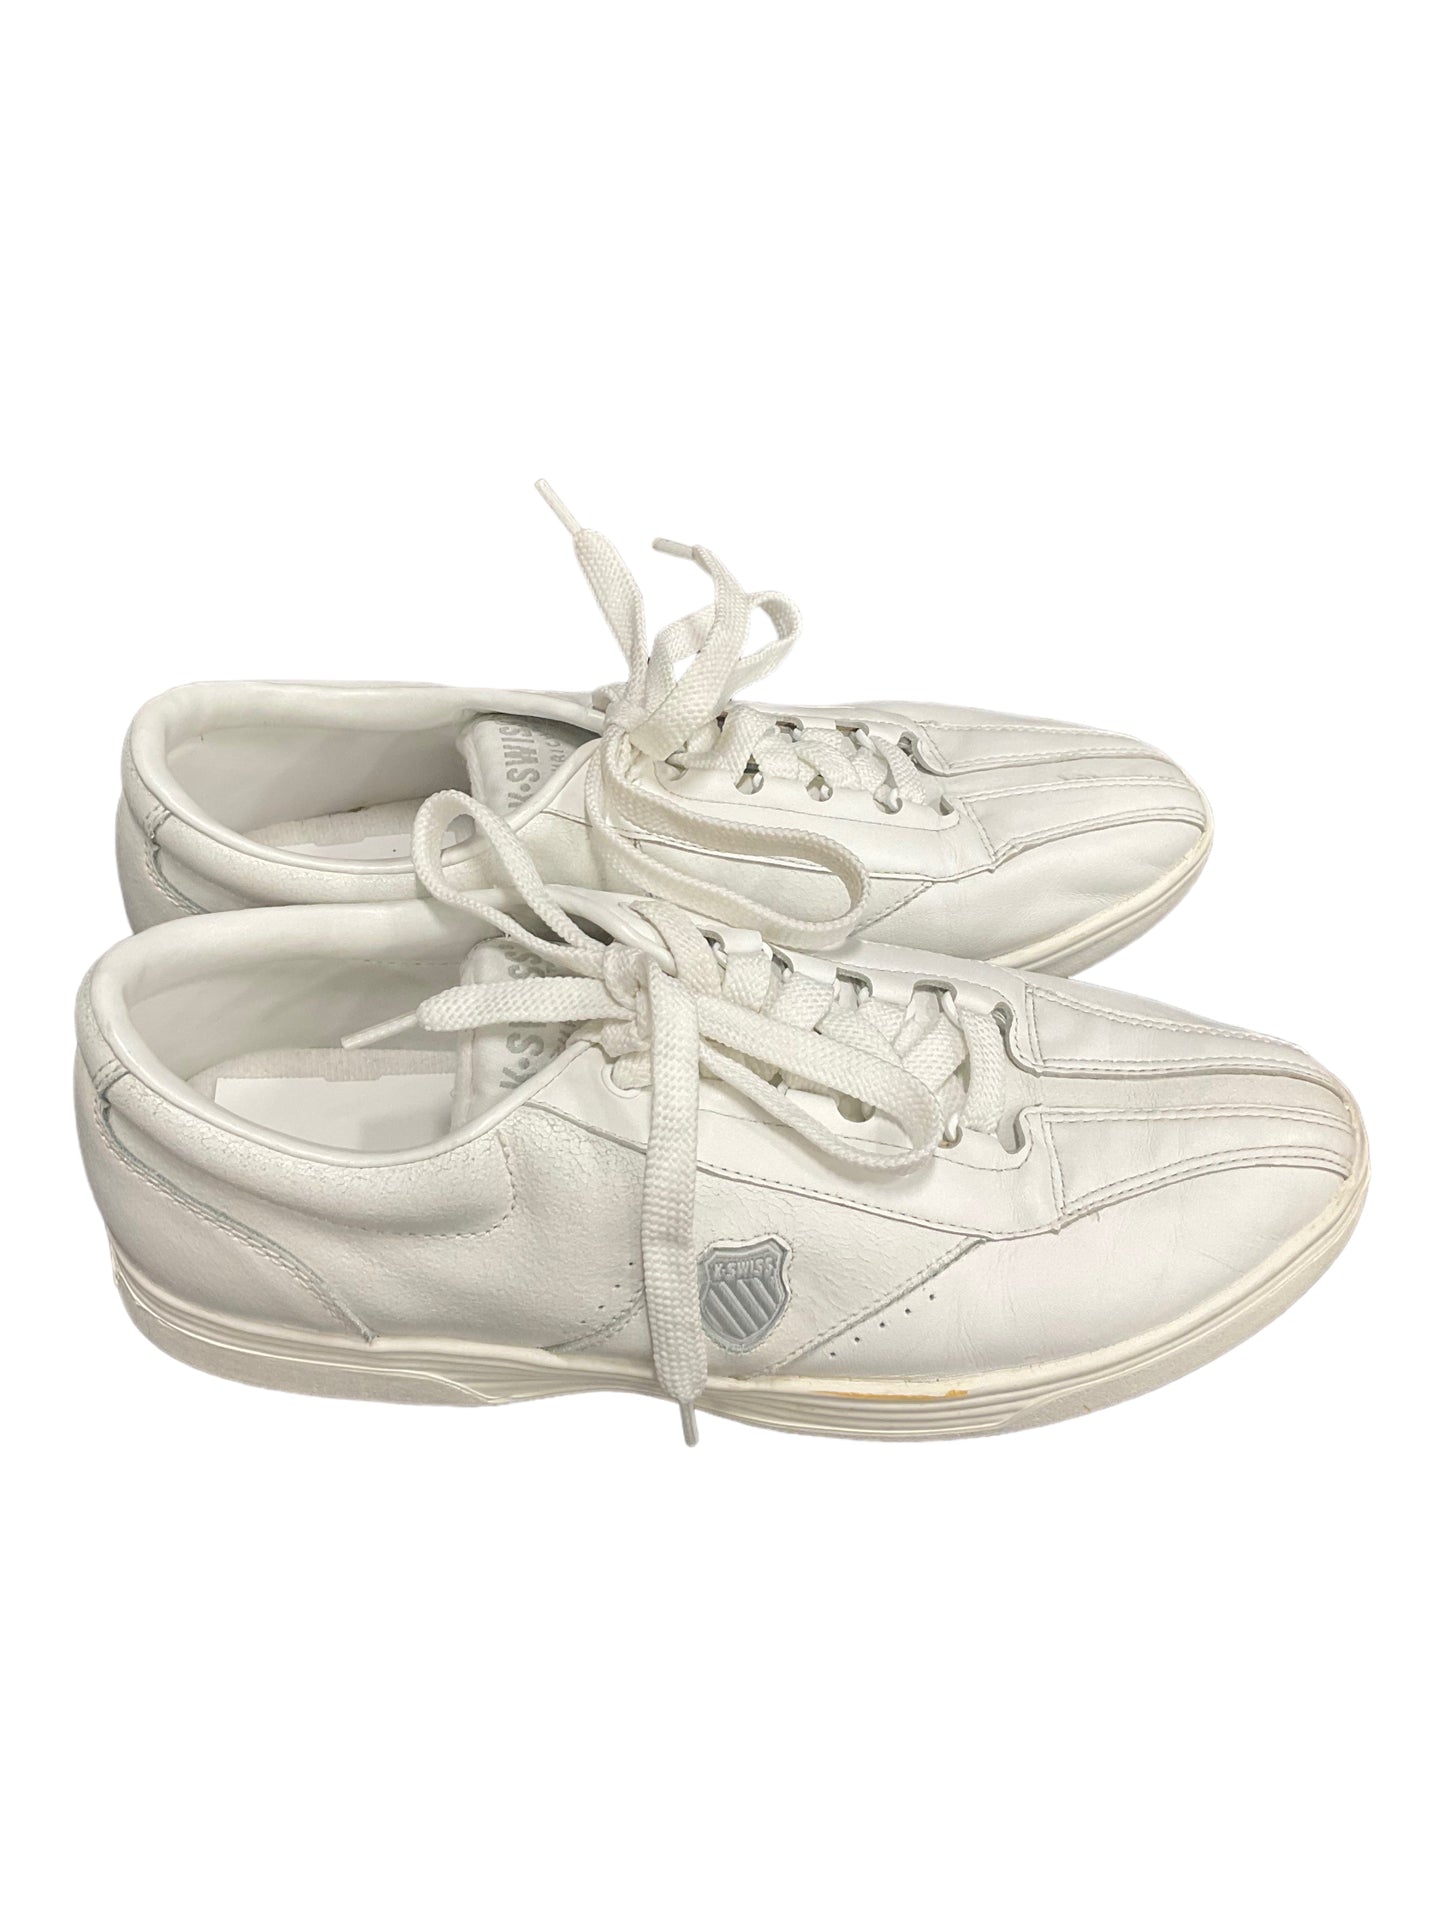 Shoes Sneakers By Clothes Mentor  Size: 10